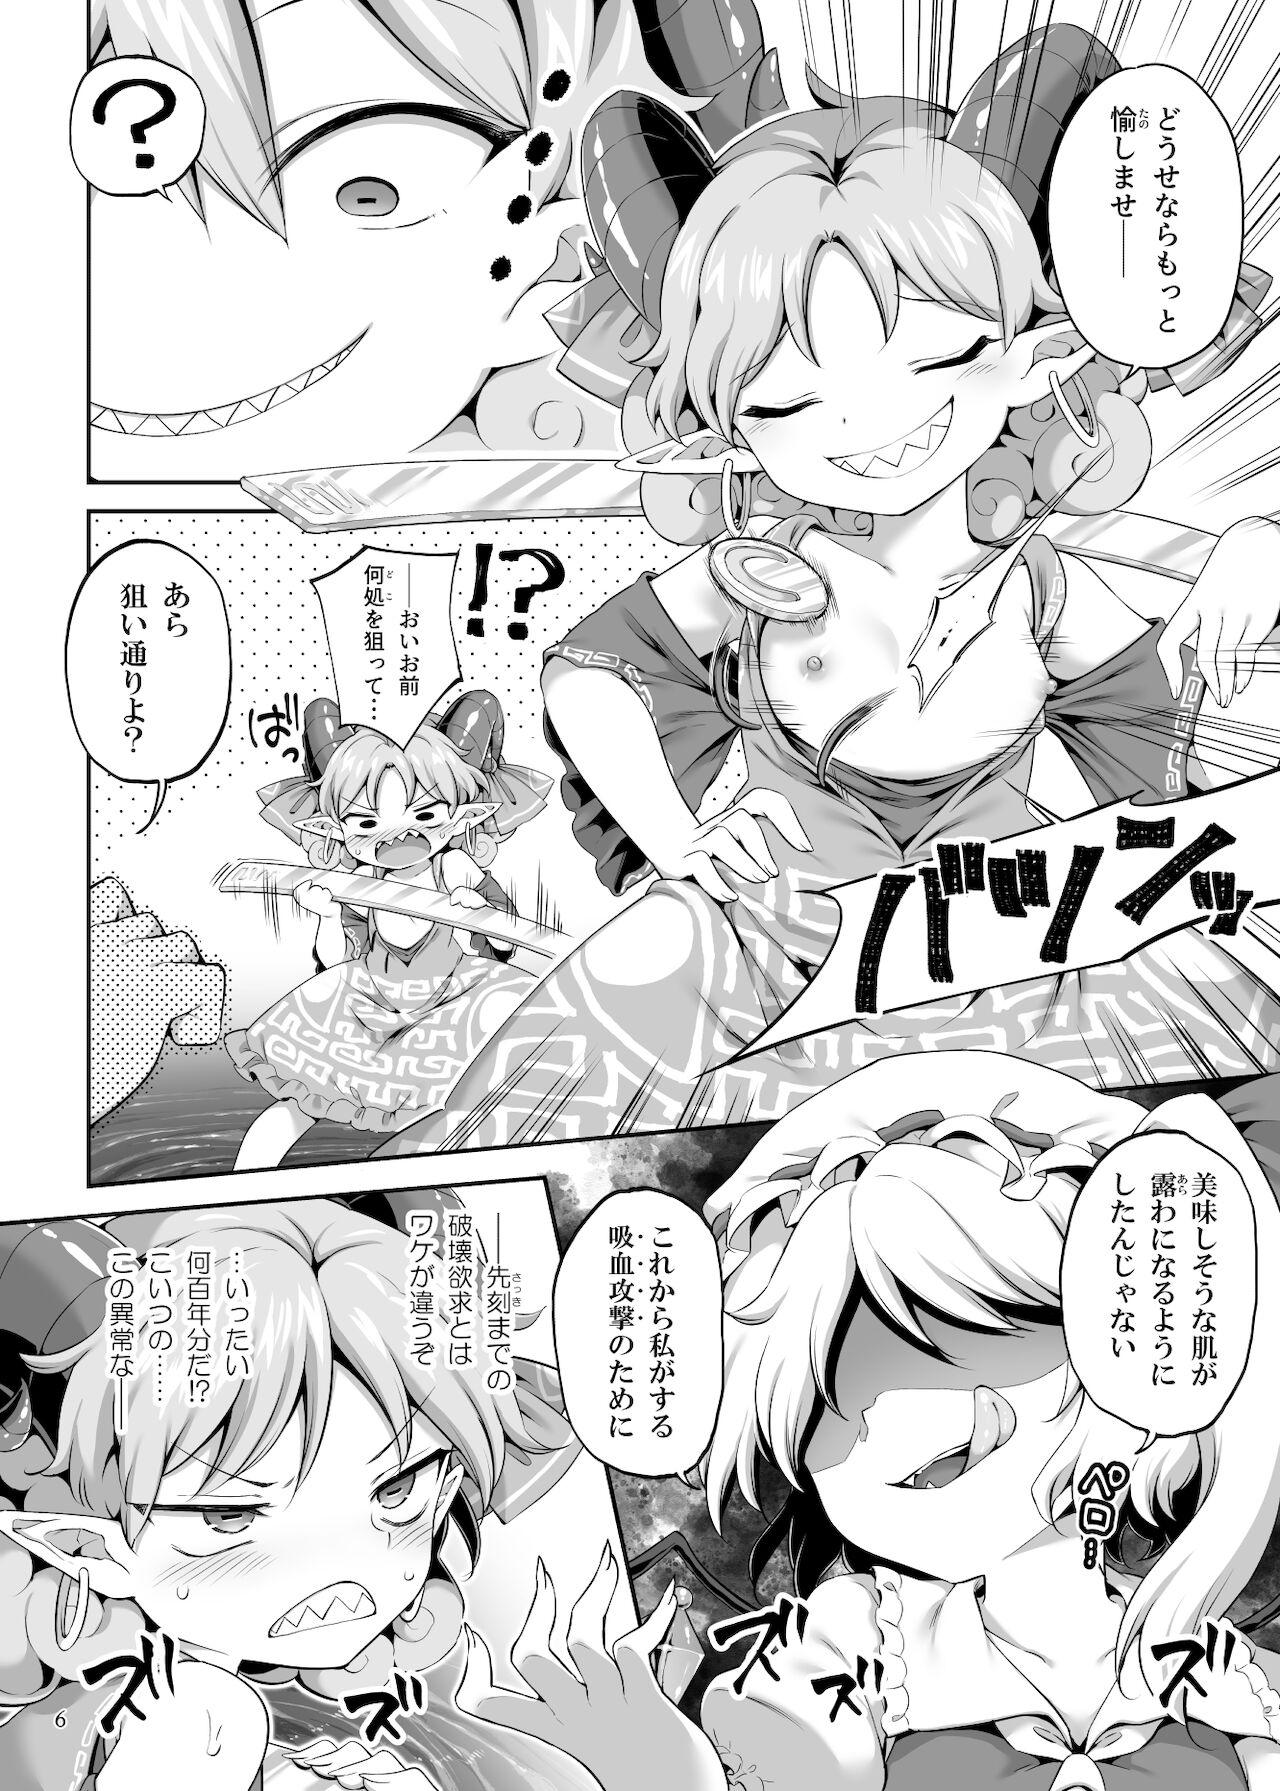 Double Blowjob 吸われて駄目なら吸ってみろ! - Touhou project Dominatrix - Page 6